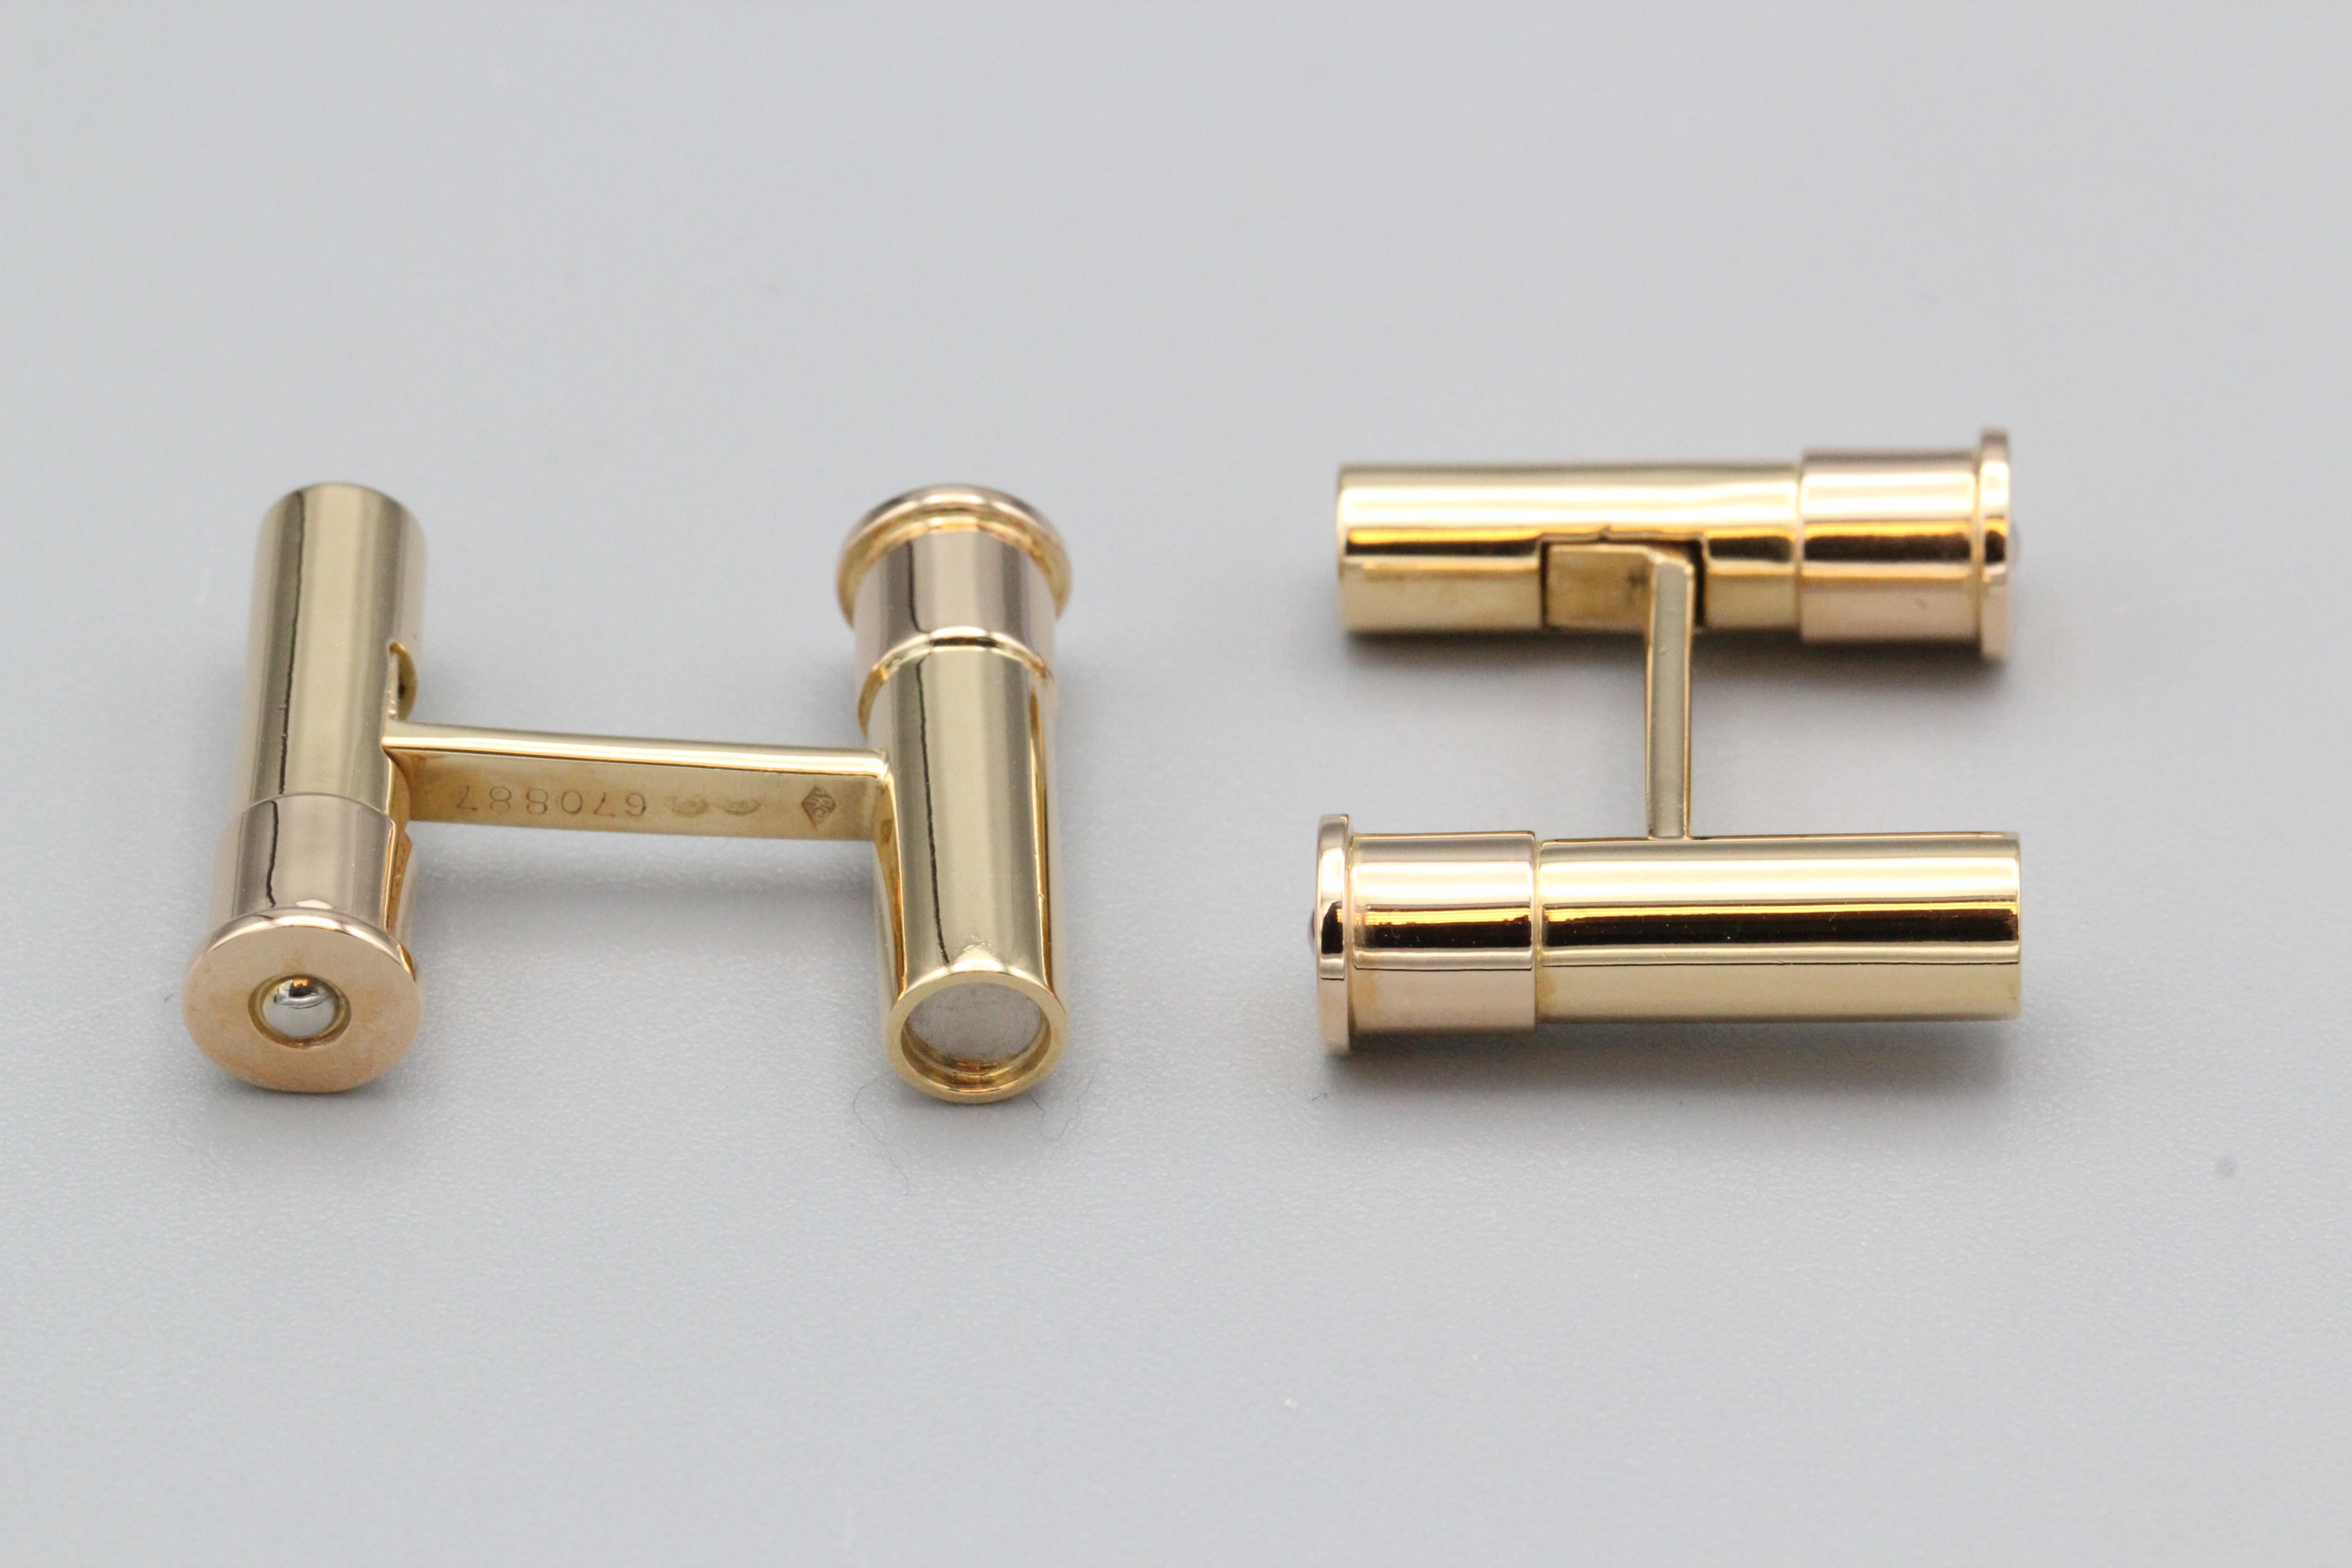 Fine pair of 18K gold bar cufflinks by Cartier.  These cufflinks feature a bar design with each bar designed as a shotgun shell.  Of very fine quality and handsome style.

Hallmarks: Cartier,  reference numbers, 18k gold assay marks, 750, maker's